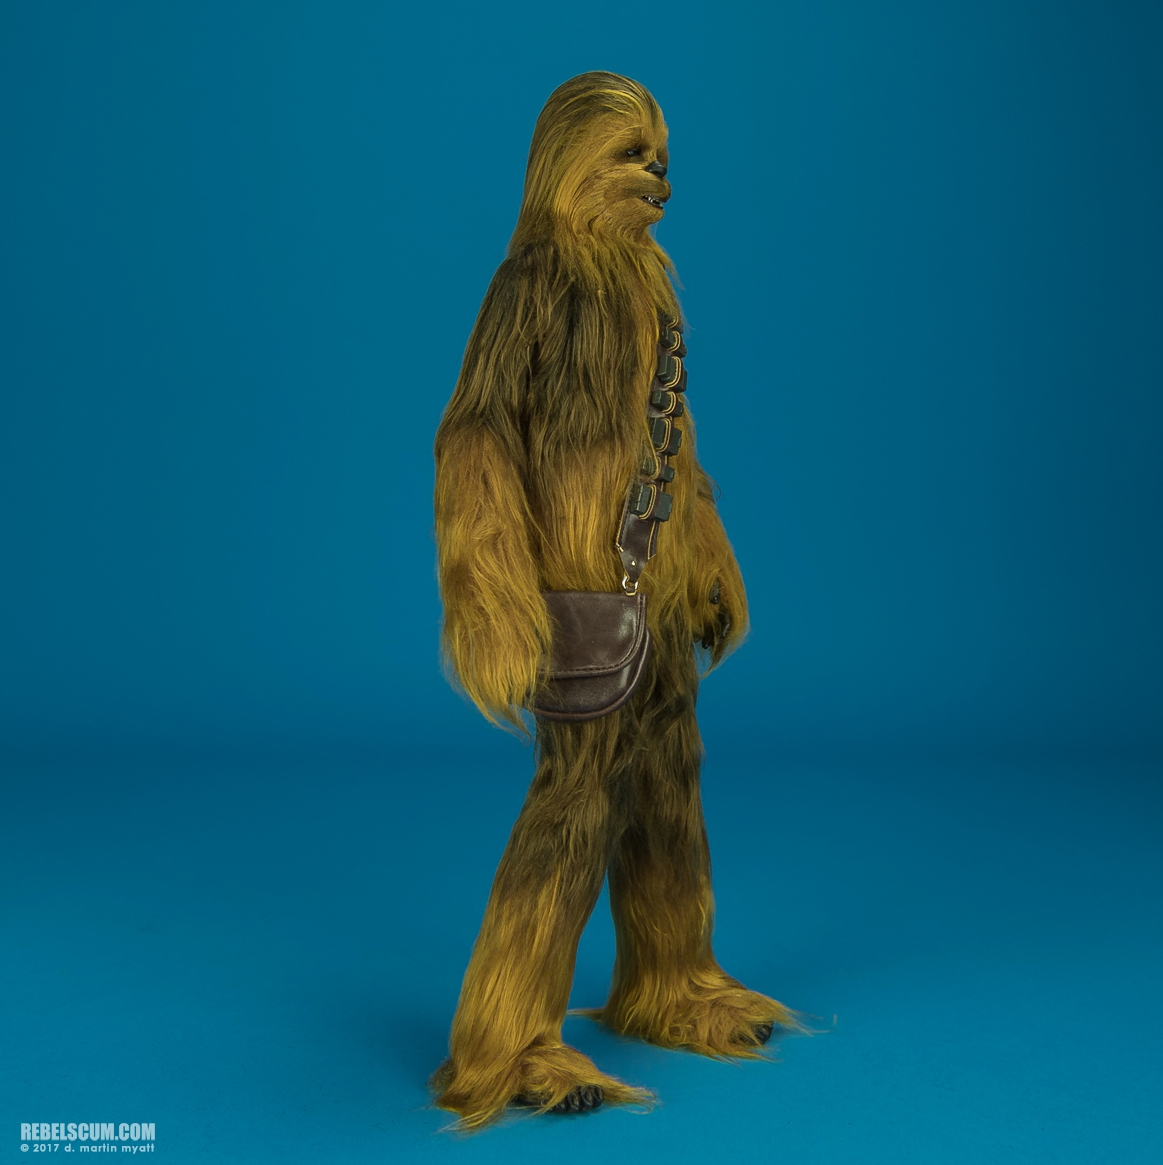 MMS376-Han-Solo-Chewbacca-The-Force-Awakens-Hot-Toys-014.jpg